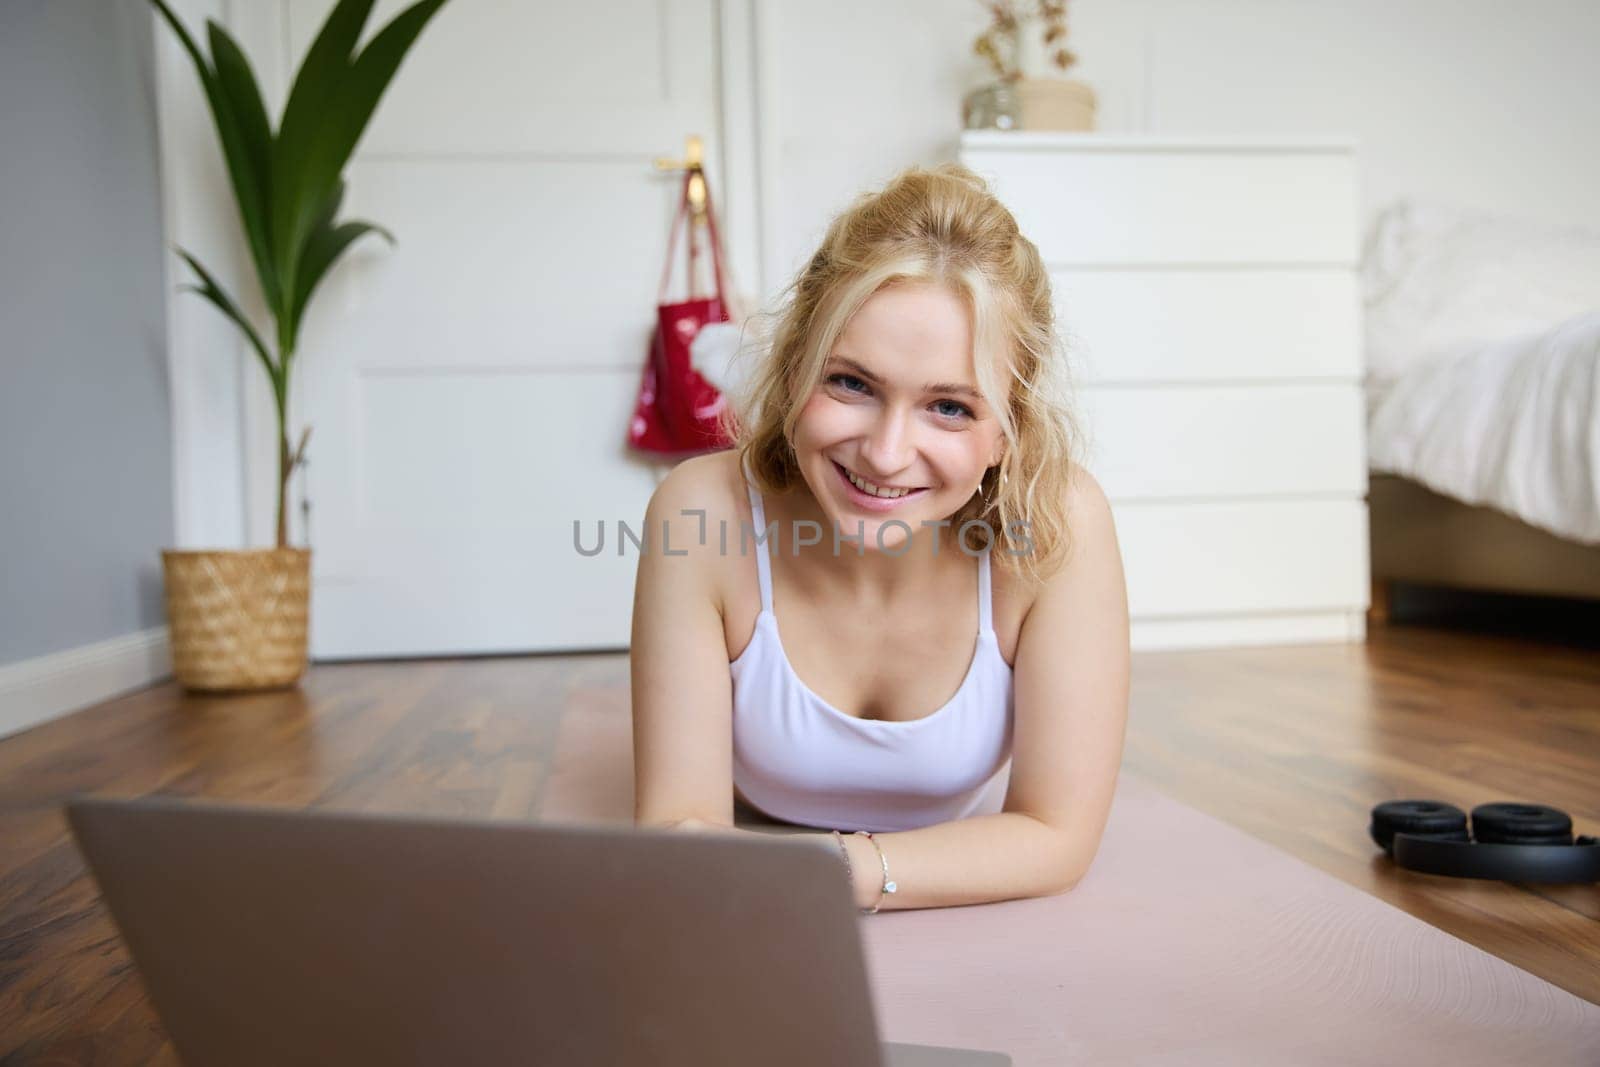 Portrait of beautiful blond woman looking at fitness video tutorials on laptop, lying on rubber yoga mat, following workout instructions online.